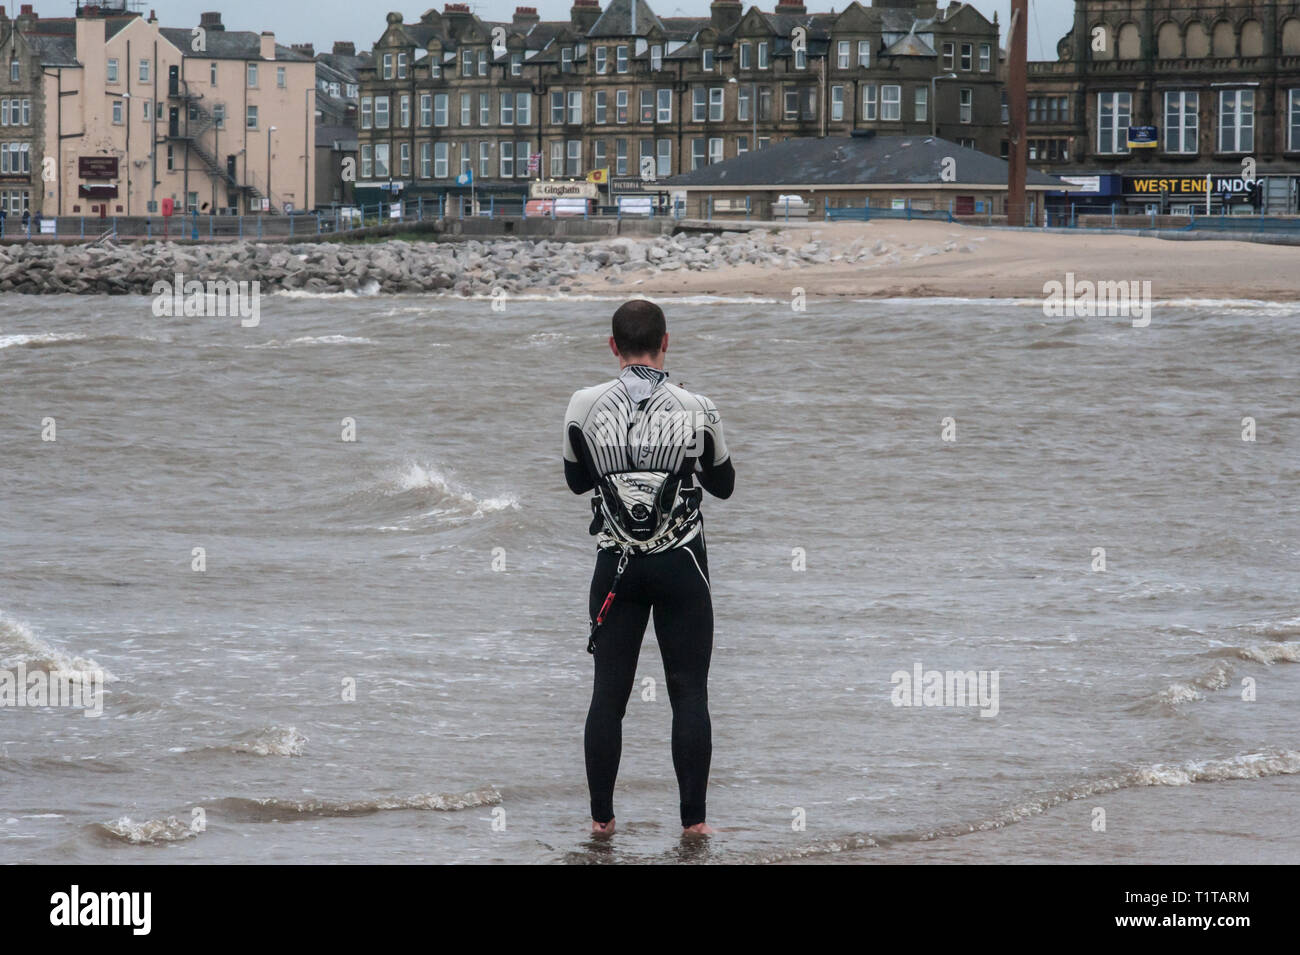 A kite surfer stands in the shallow water on the shore of Morecambe's West End. Stock Photo